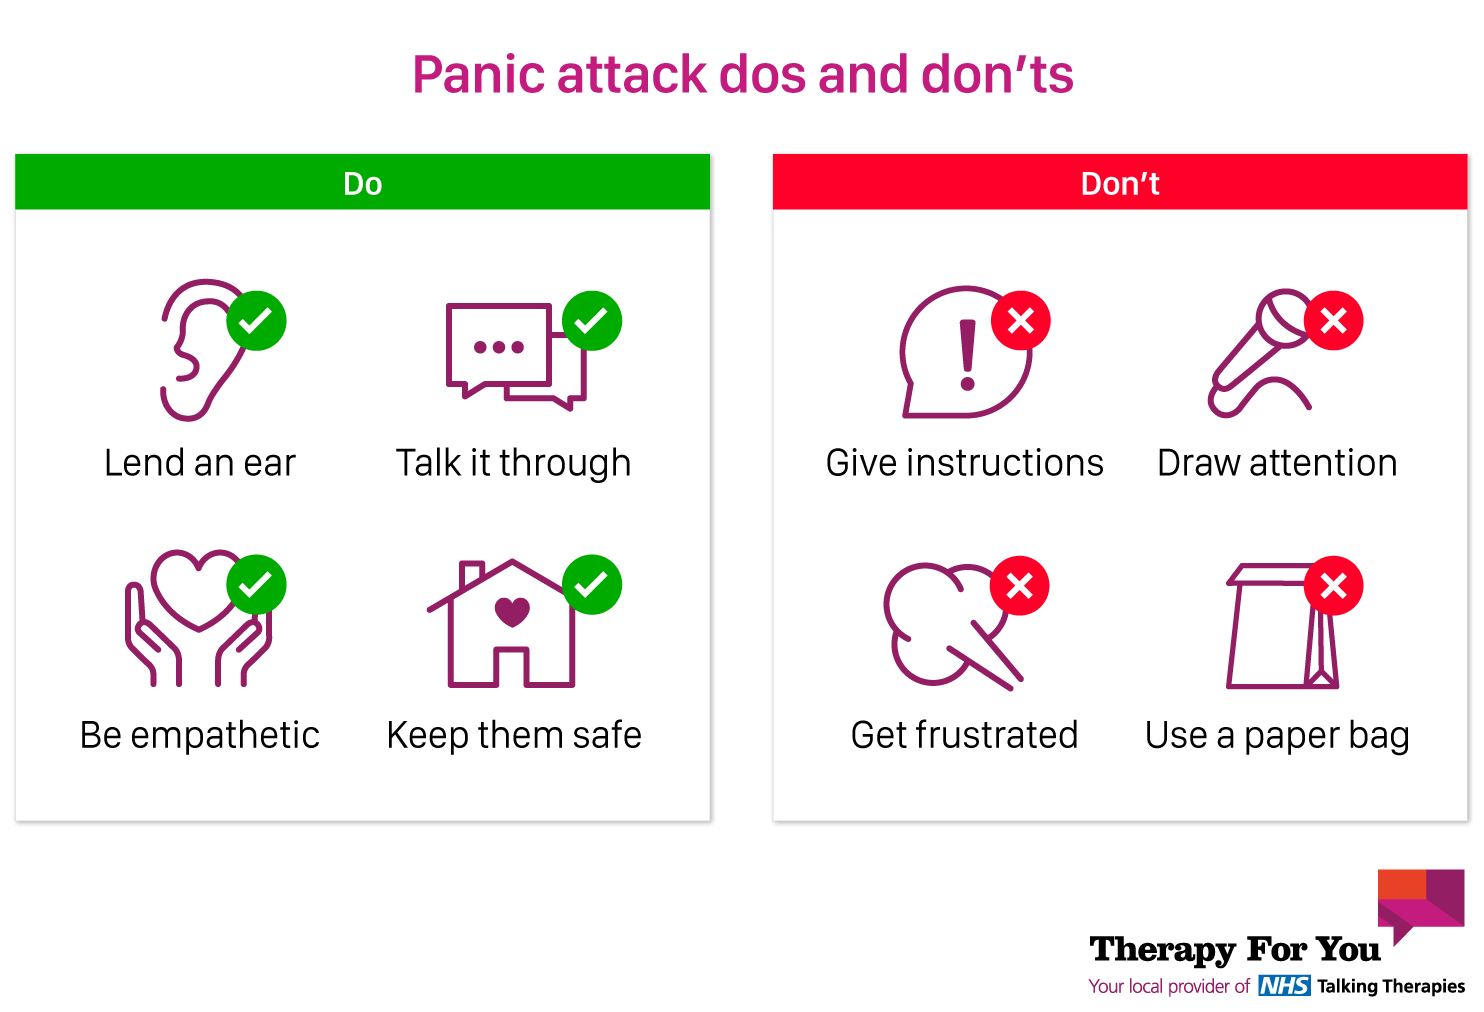 Infographic by Therapy For You: A guide to helping someone having a panic attack